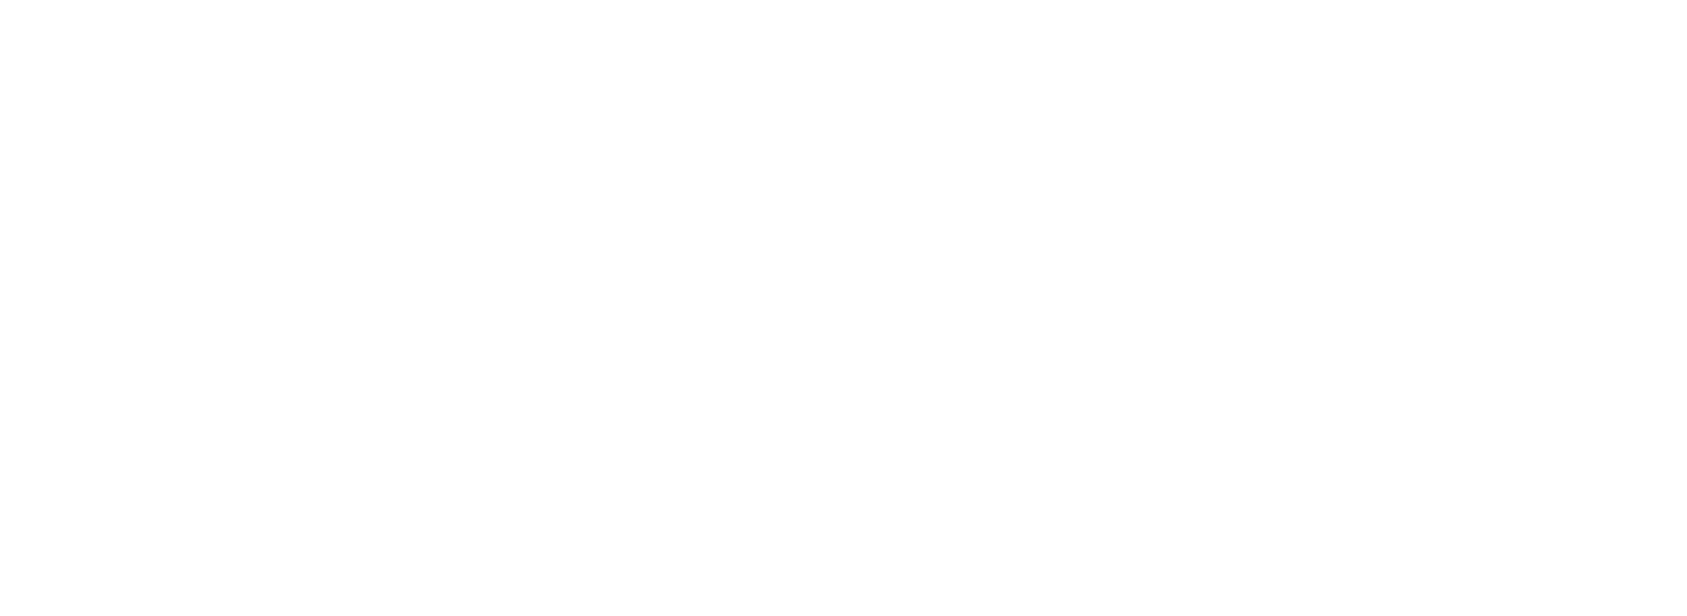 National Institute of Economic and Social Research